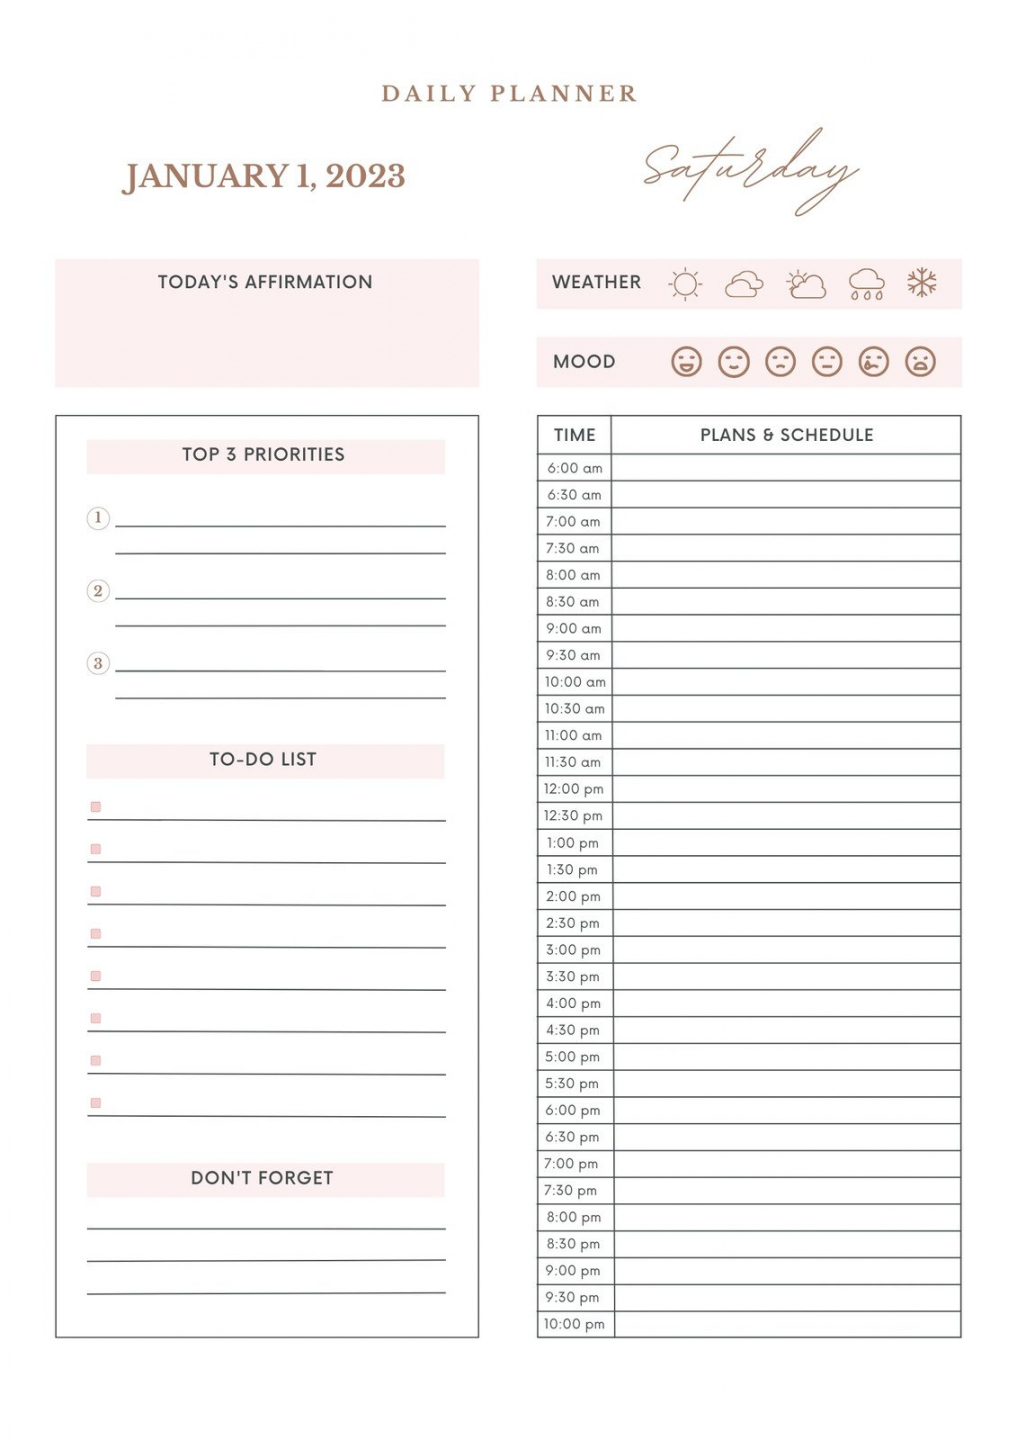 Free Printable Daily Calendar - Printable - Free daily planner templates to customize  Canva